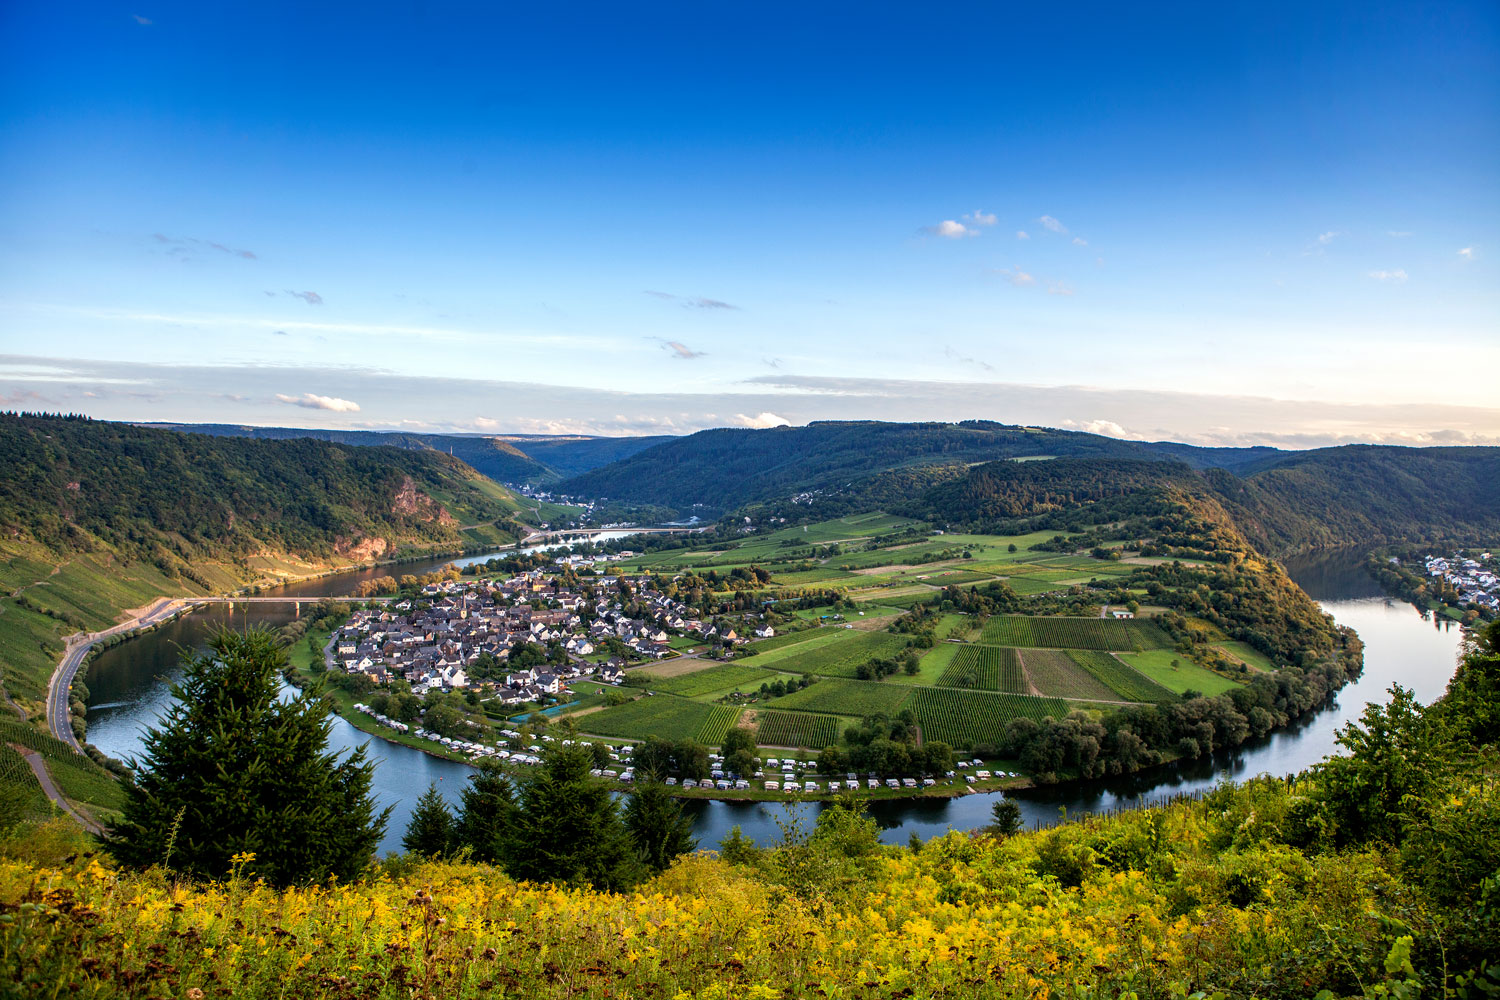 Moselle River at dawn